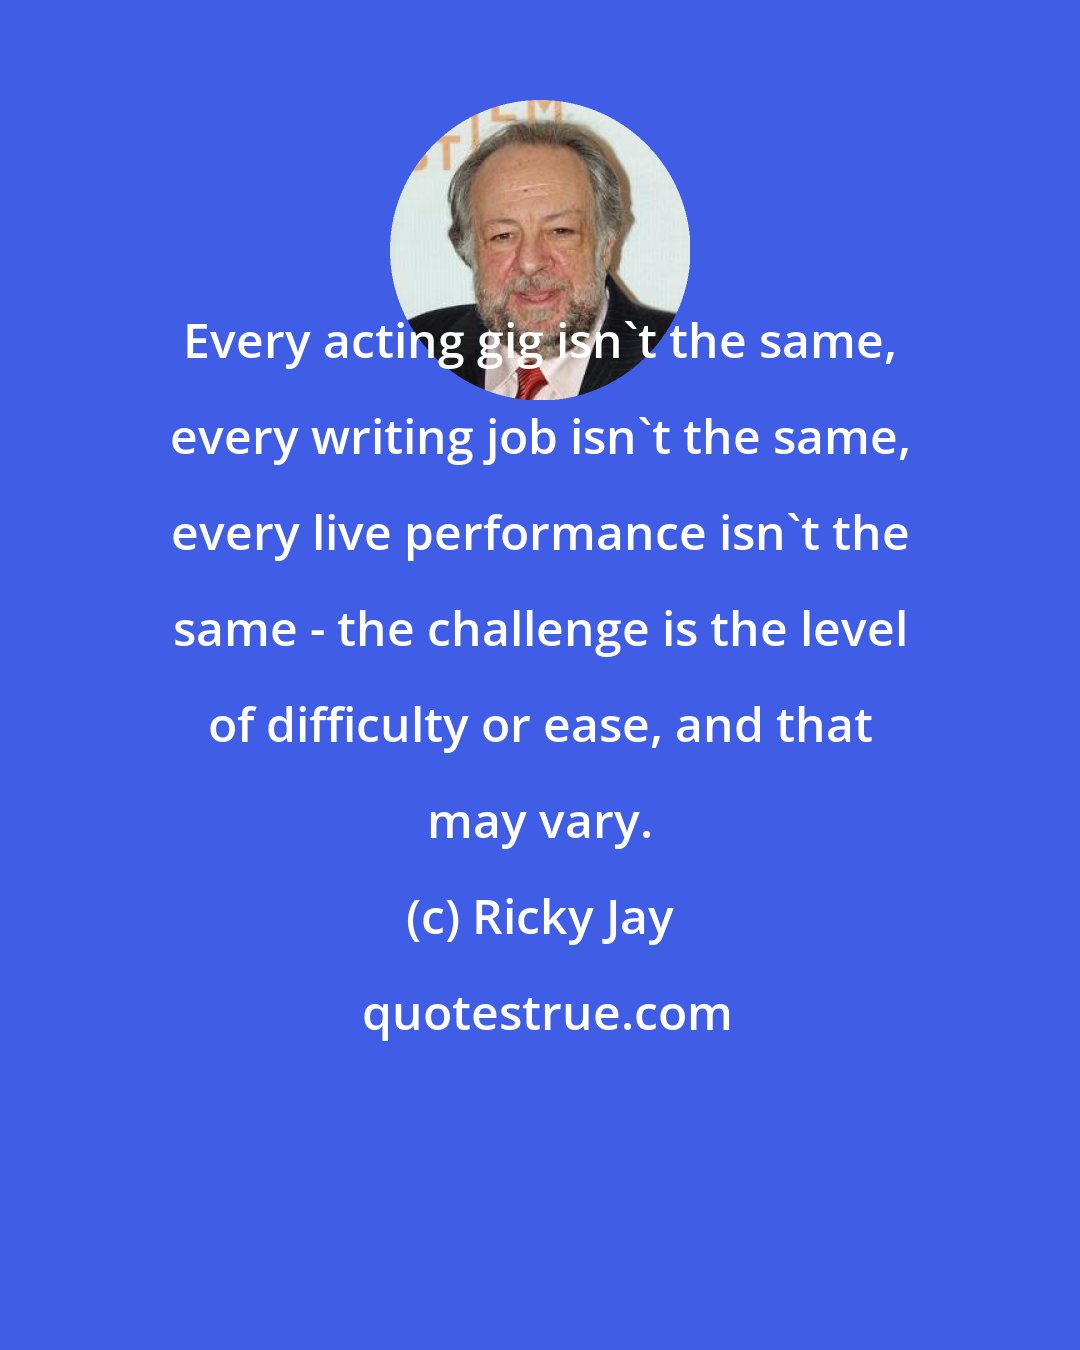 Ricky Jay: Every acting gig isn't the same, every writing job isn't the same, every live performance isn't the same - the challenge is the level of difficulty or ease, and that may vary.